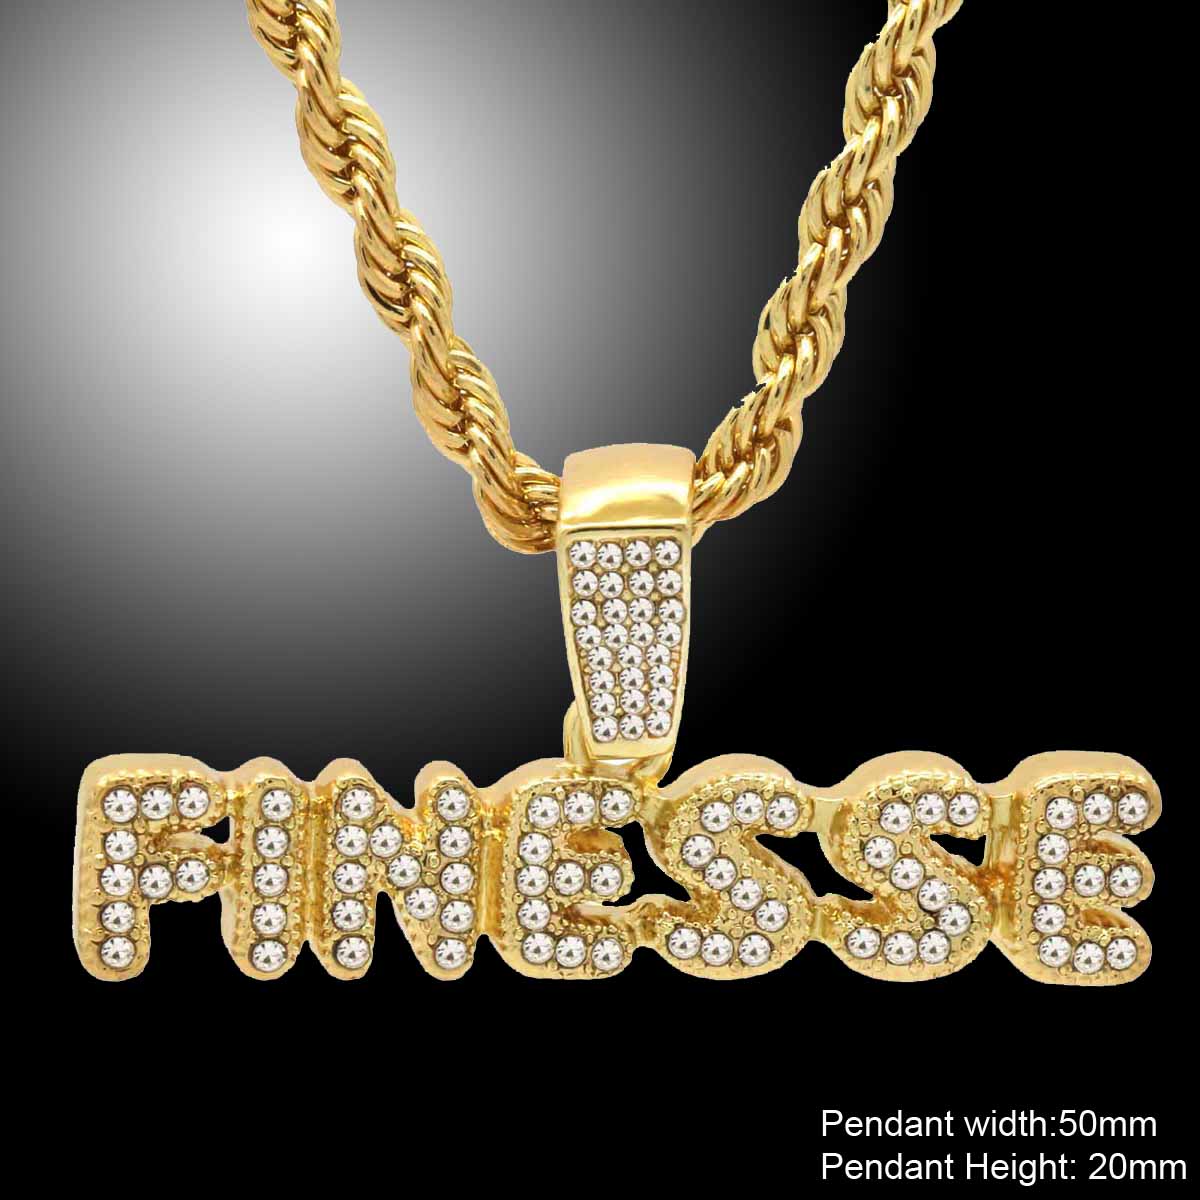 FINESSE PENDANT WITH GOLD ROPE CHAIN